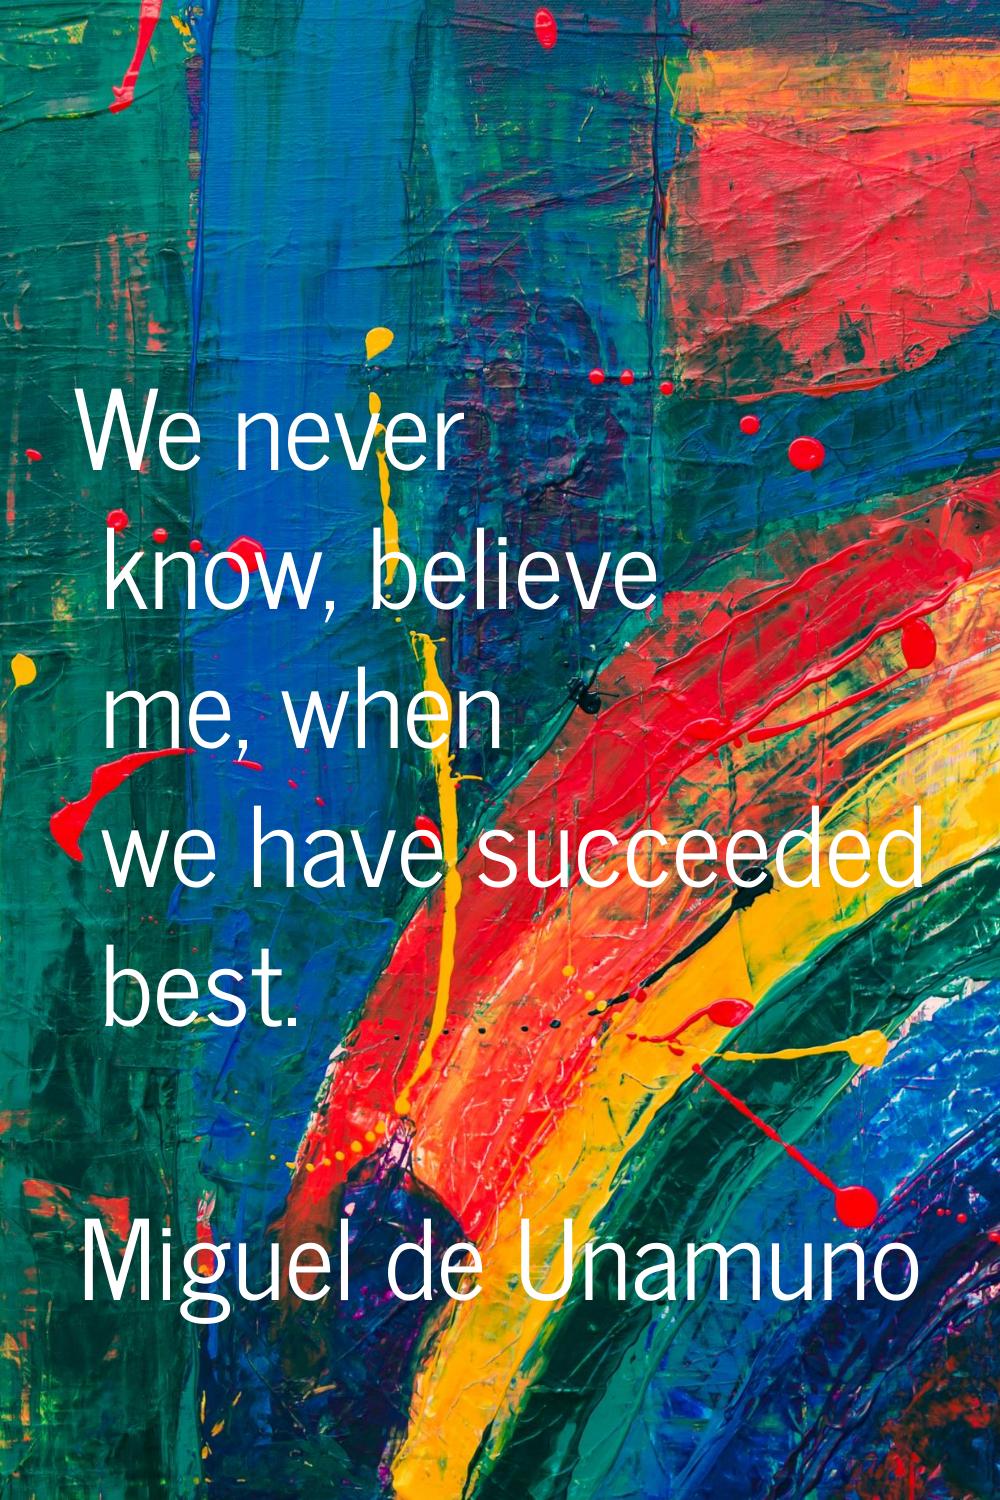 We never know, believe me, when we have succeeded best.